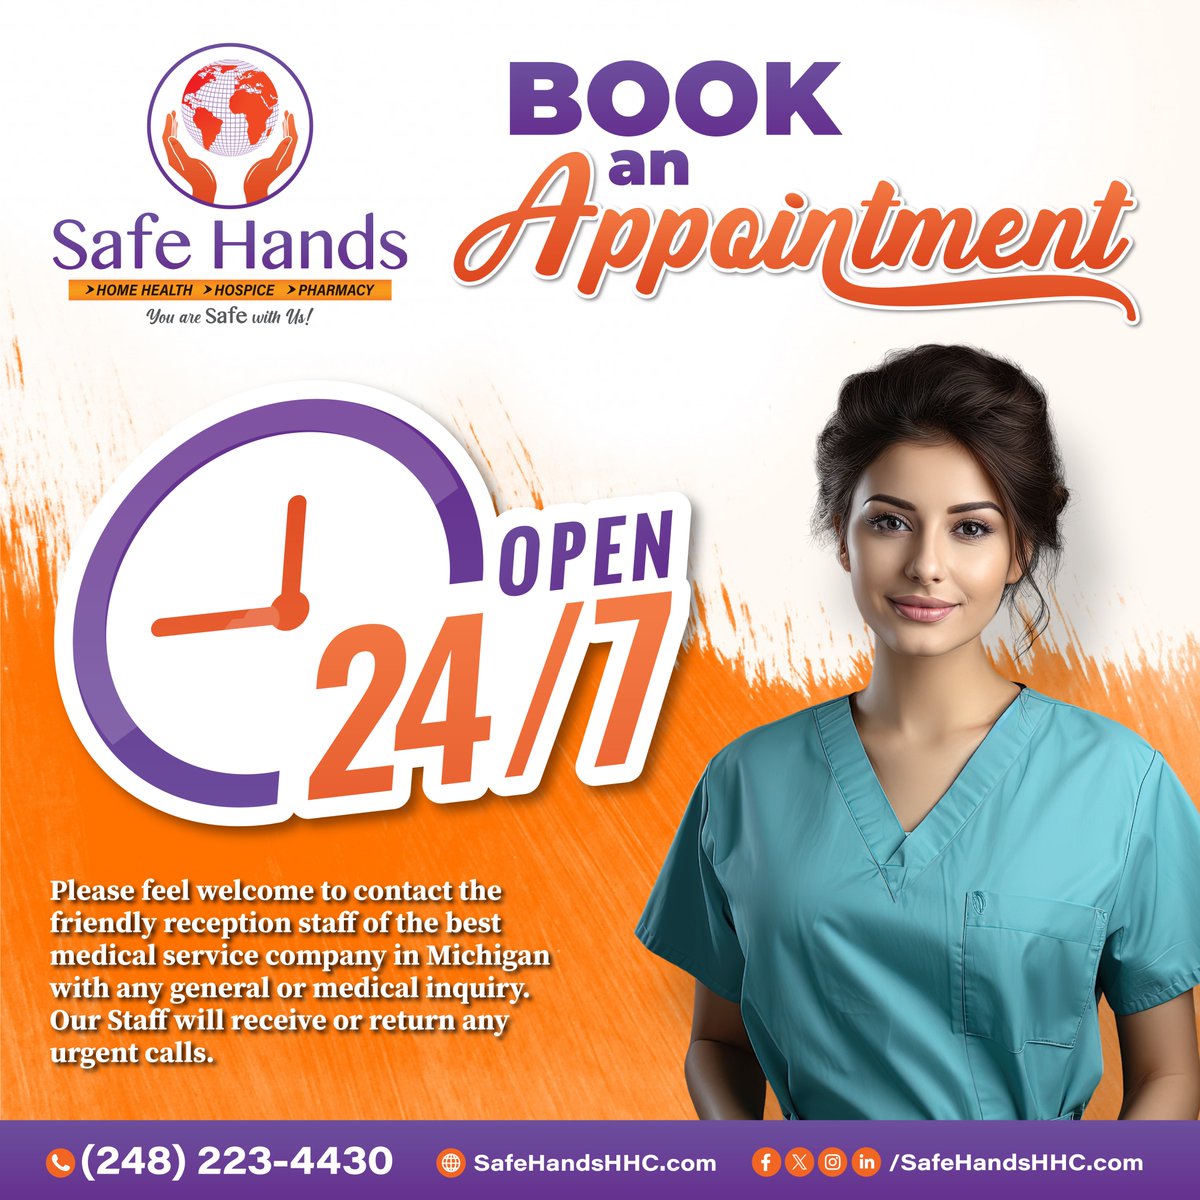 Your health can't wait, so why should you? 🕒 Our doors are open 24/7 to give you the care you need, when you need it. Book an appointment anytime!

Feel free to contact us now: +1 (248) 223-4430
or
Visit us: safehandshhc.com

#AlwaysOpen #24hrCare #SafeHandsHHC #Michigan